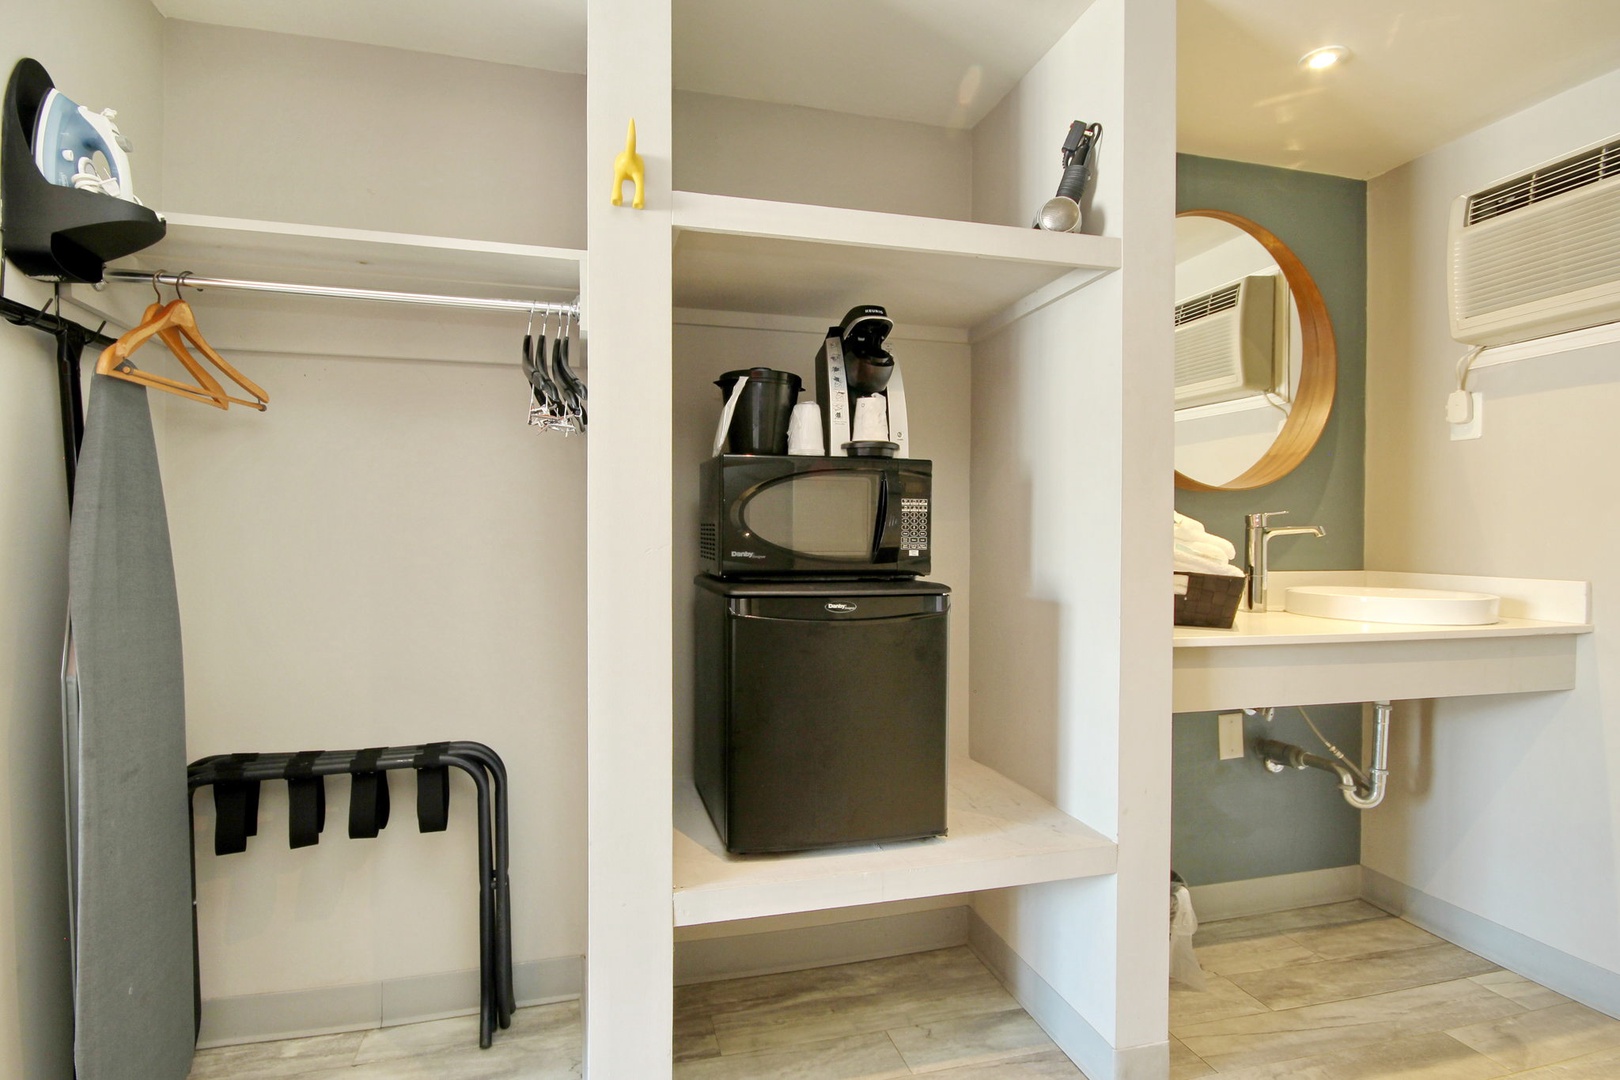 Compact kitchenette for easy snacking